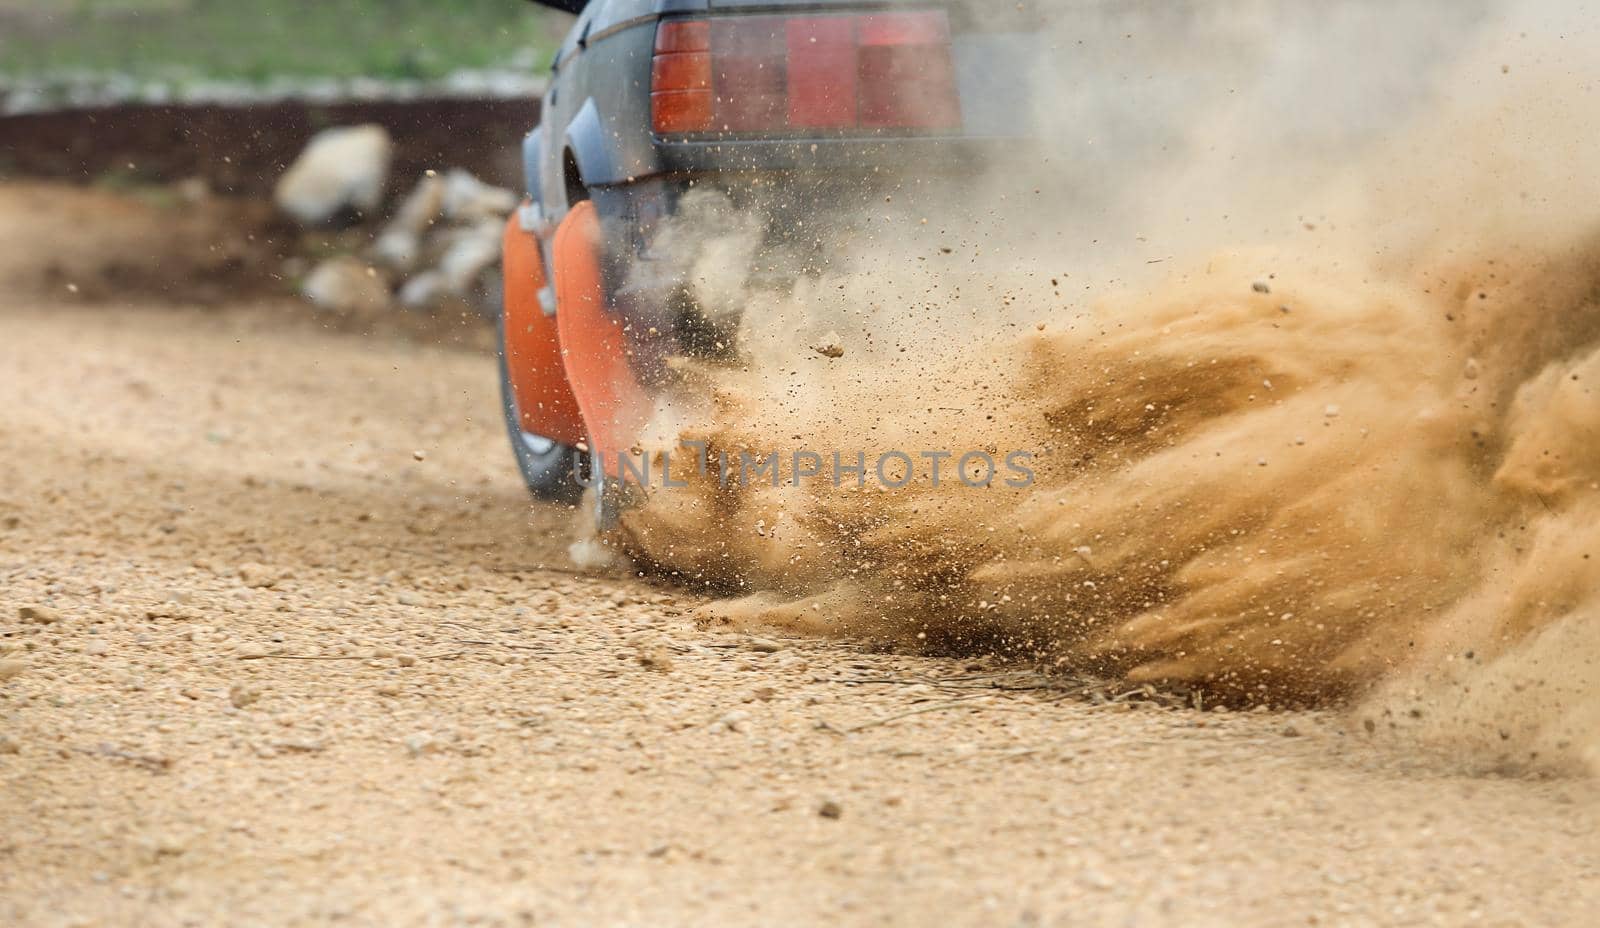 Rally Car turning in dirt track by toa55